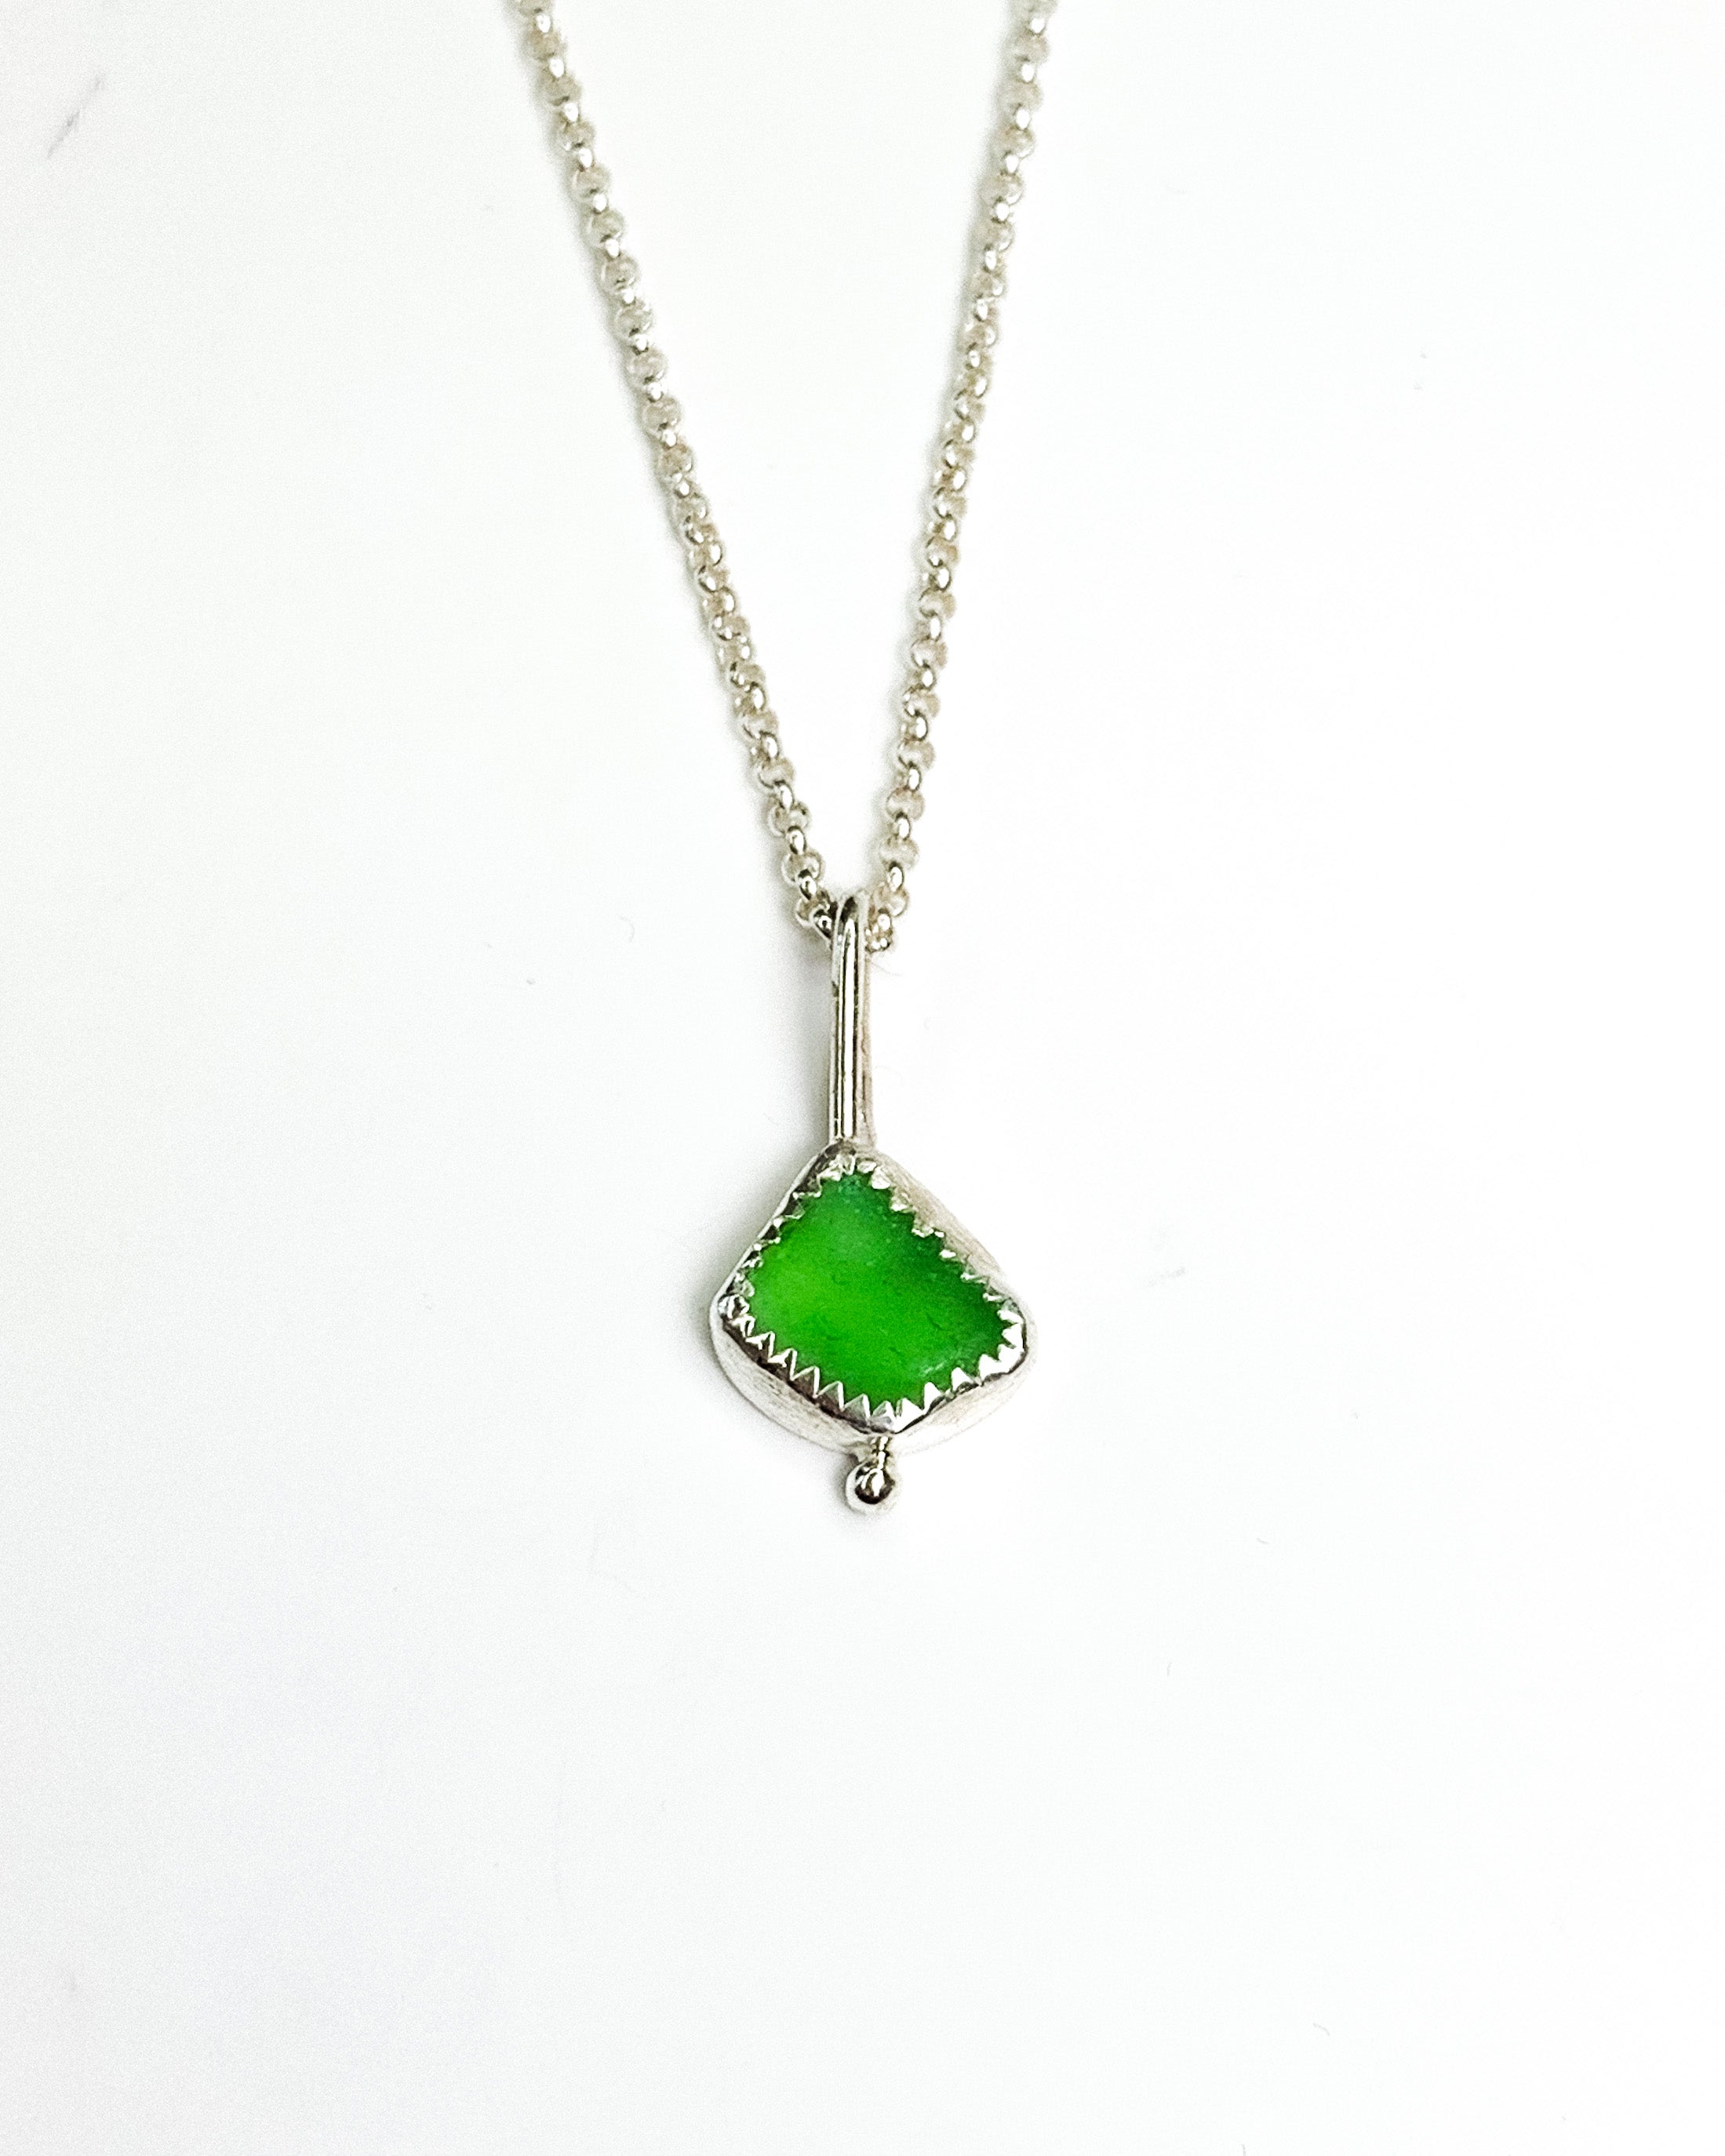 Beach glass necklace - sterling silver